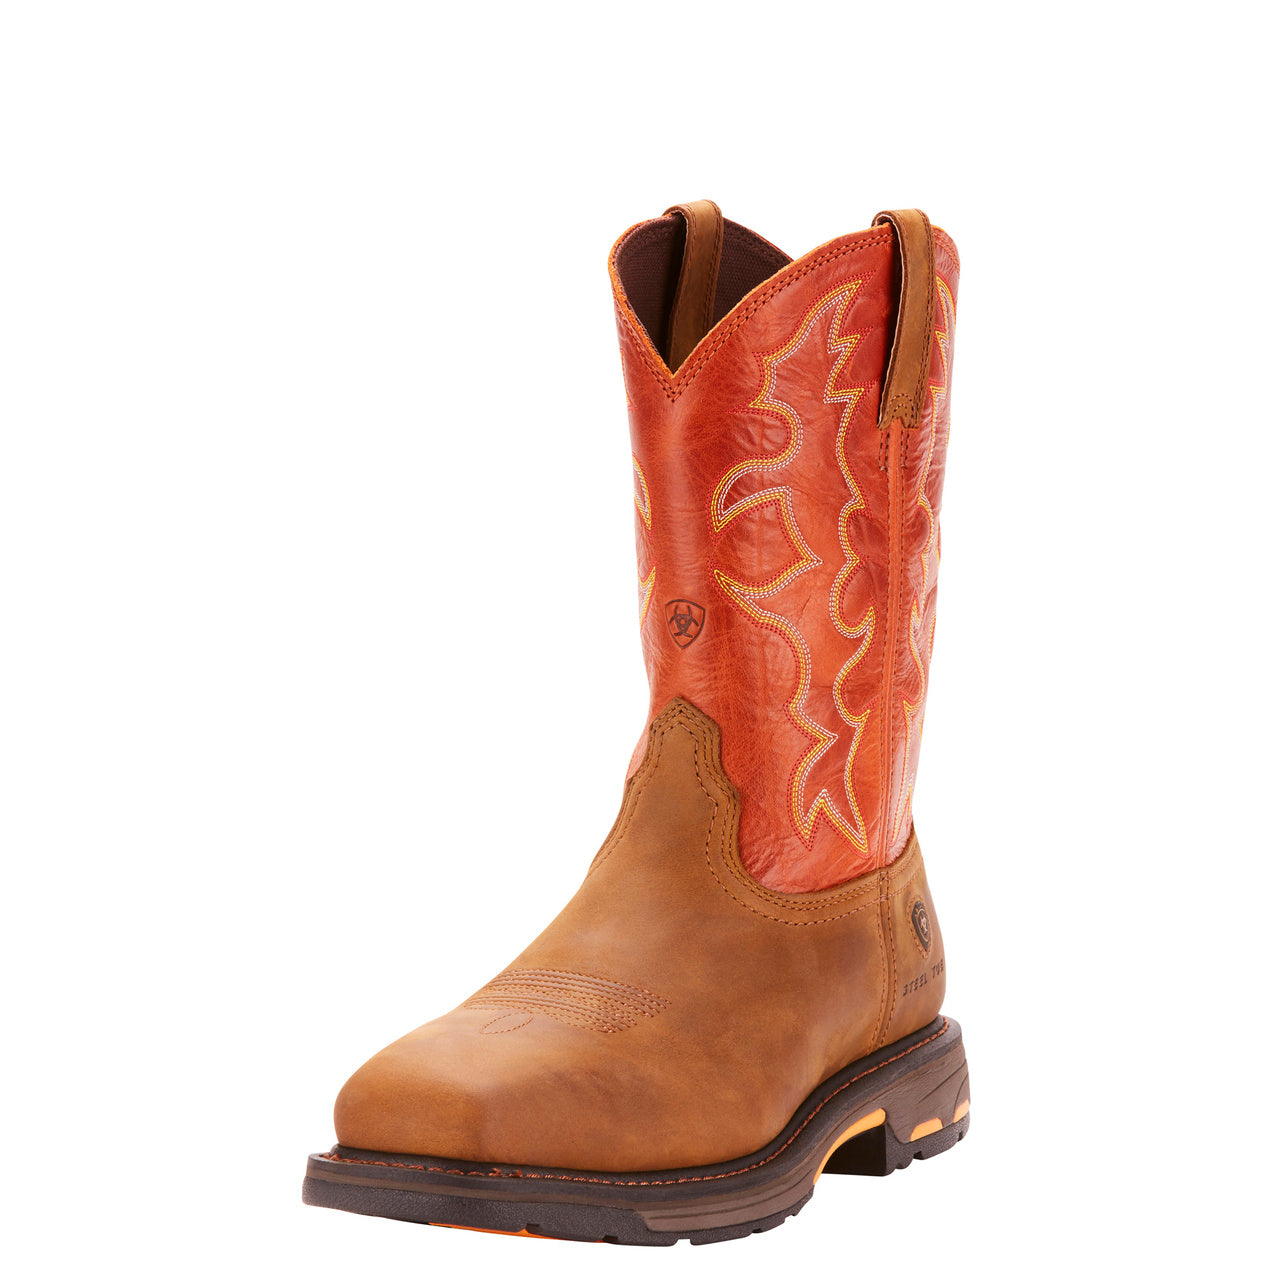 Ariat Workhog Wide Square Toe Boot 10 D